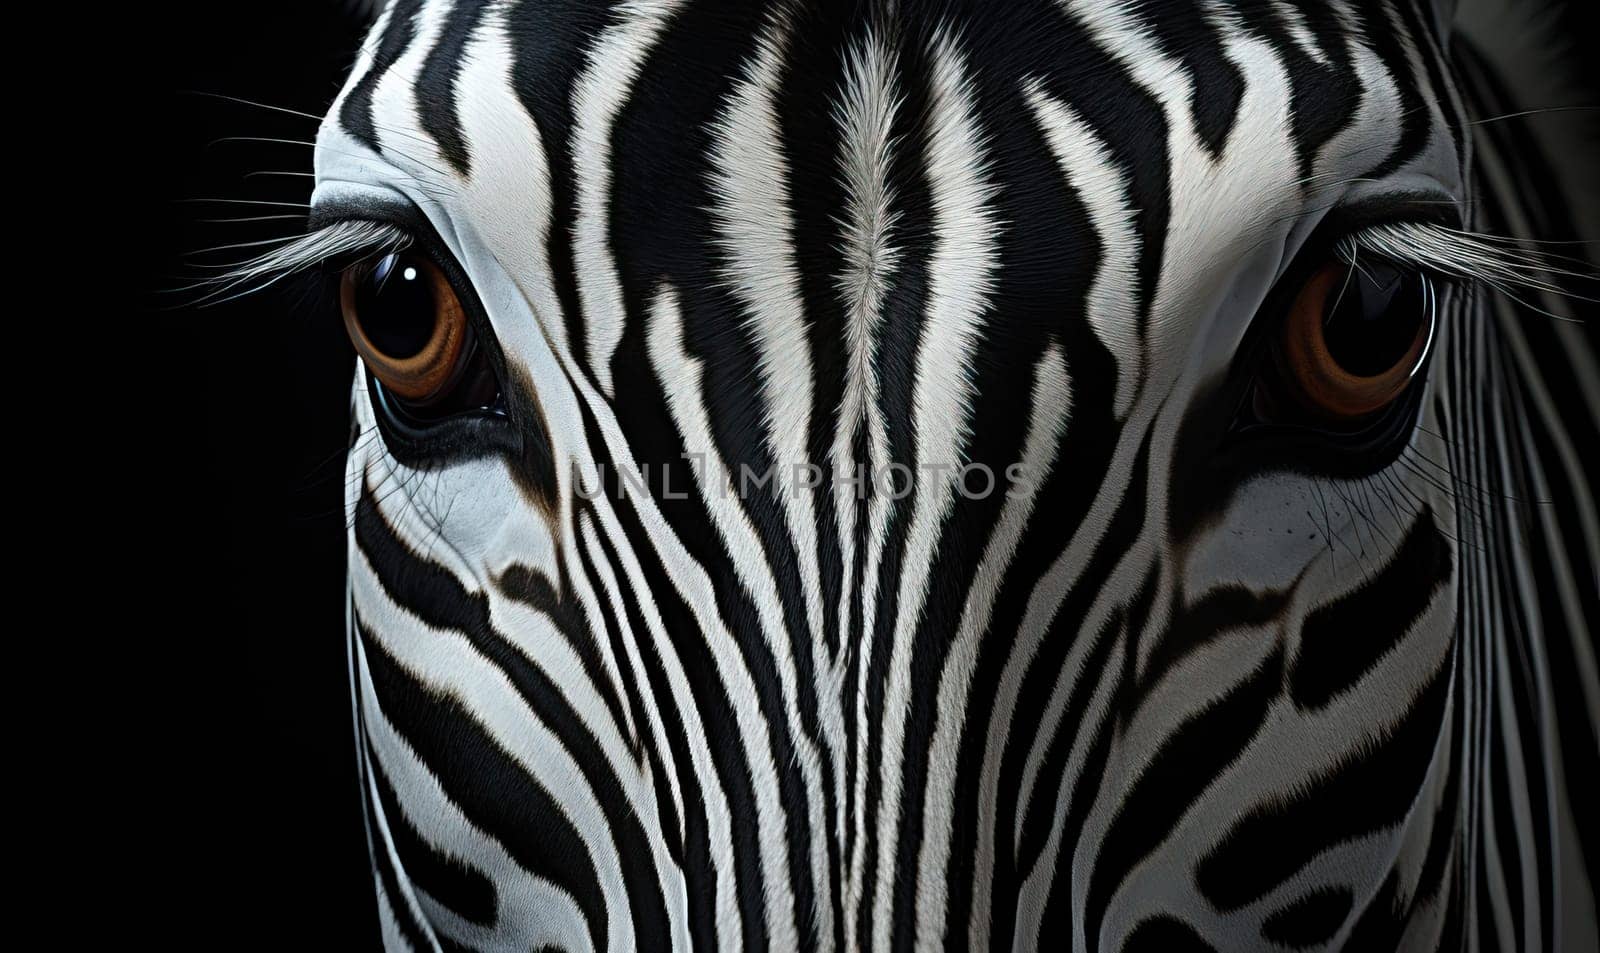 Image of a zebra's face on a black background. by Fischeron